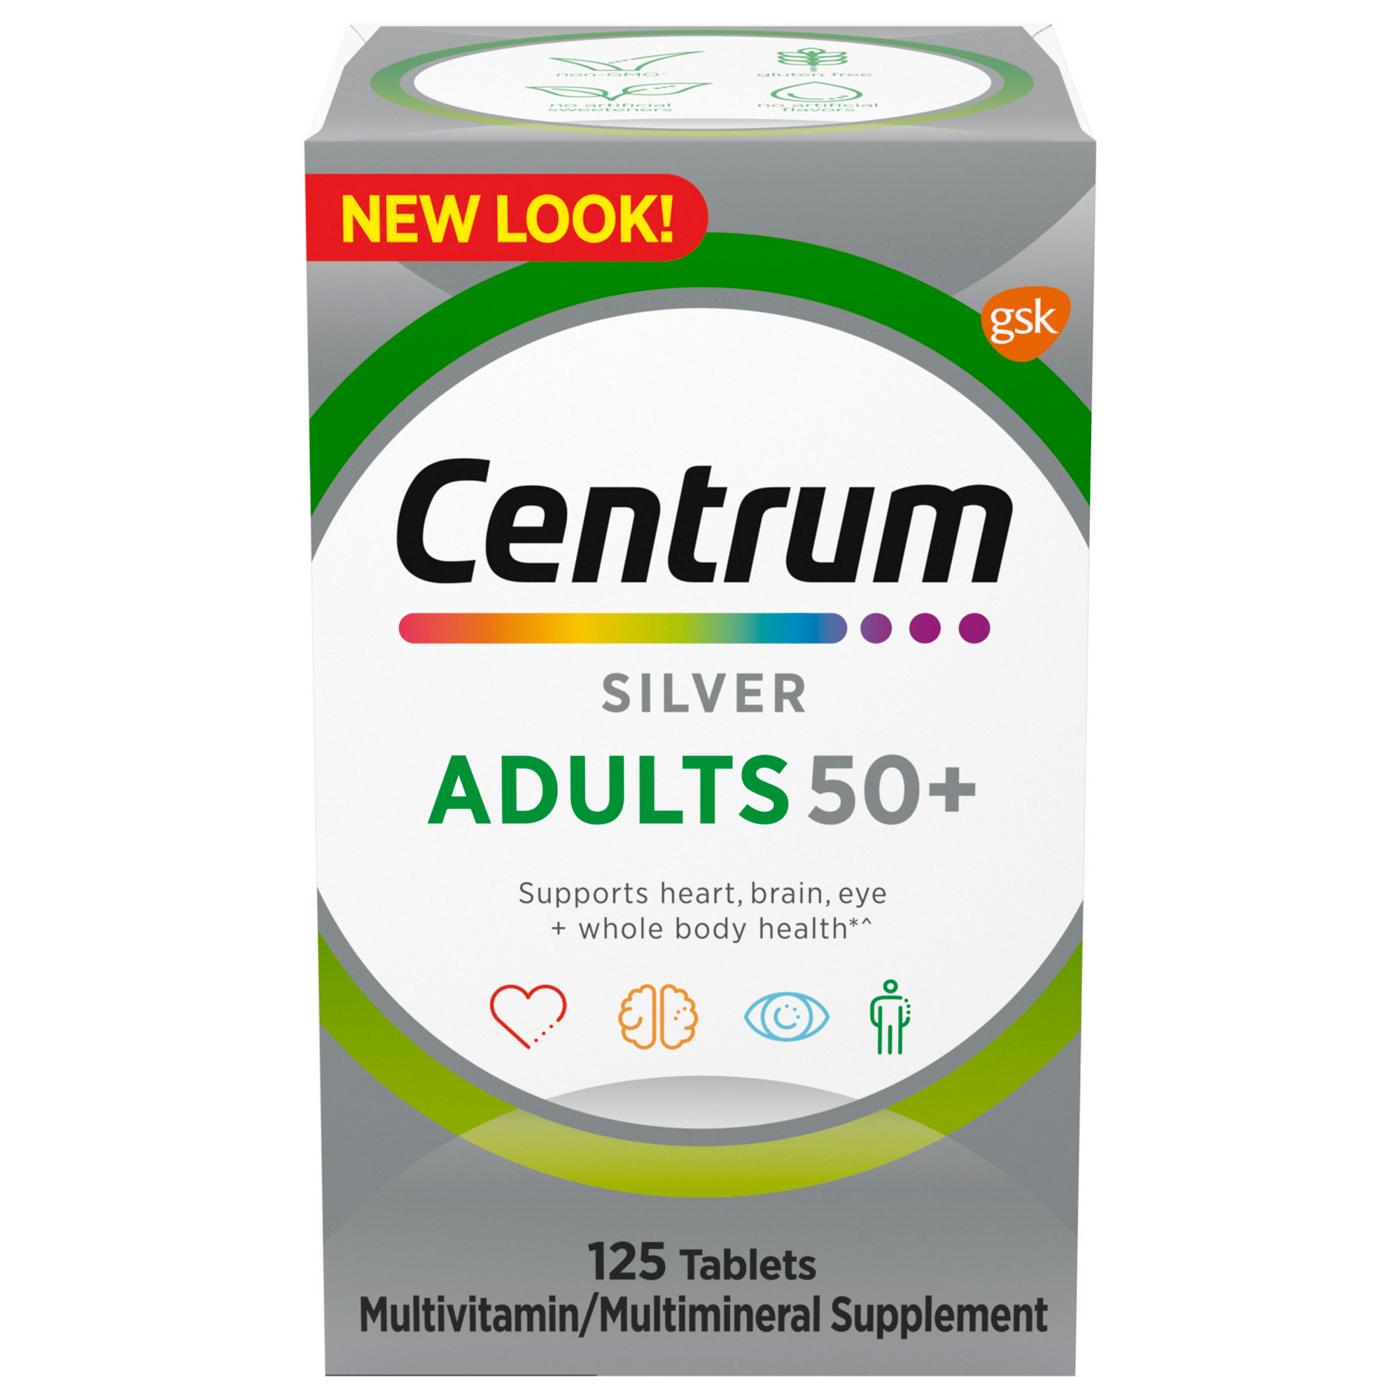 Centrum Silver Adults 50+ Multivitamin; image 1 of 2